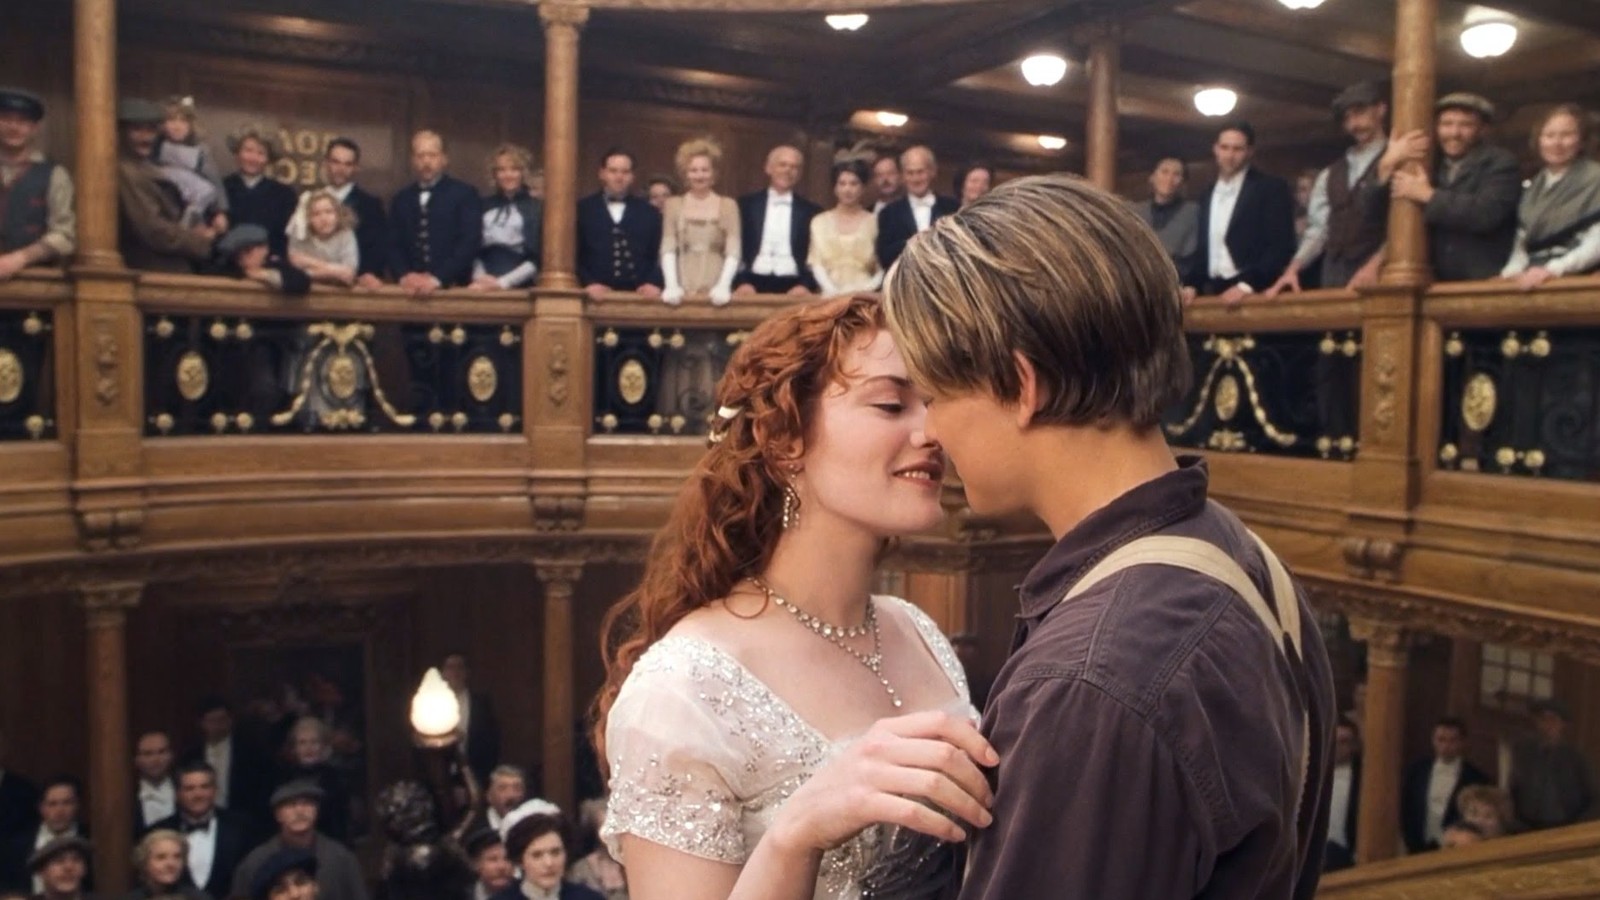 The Ending of 'Titanic' Is Still Magical, 20 Years Later - The Atlantic